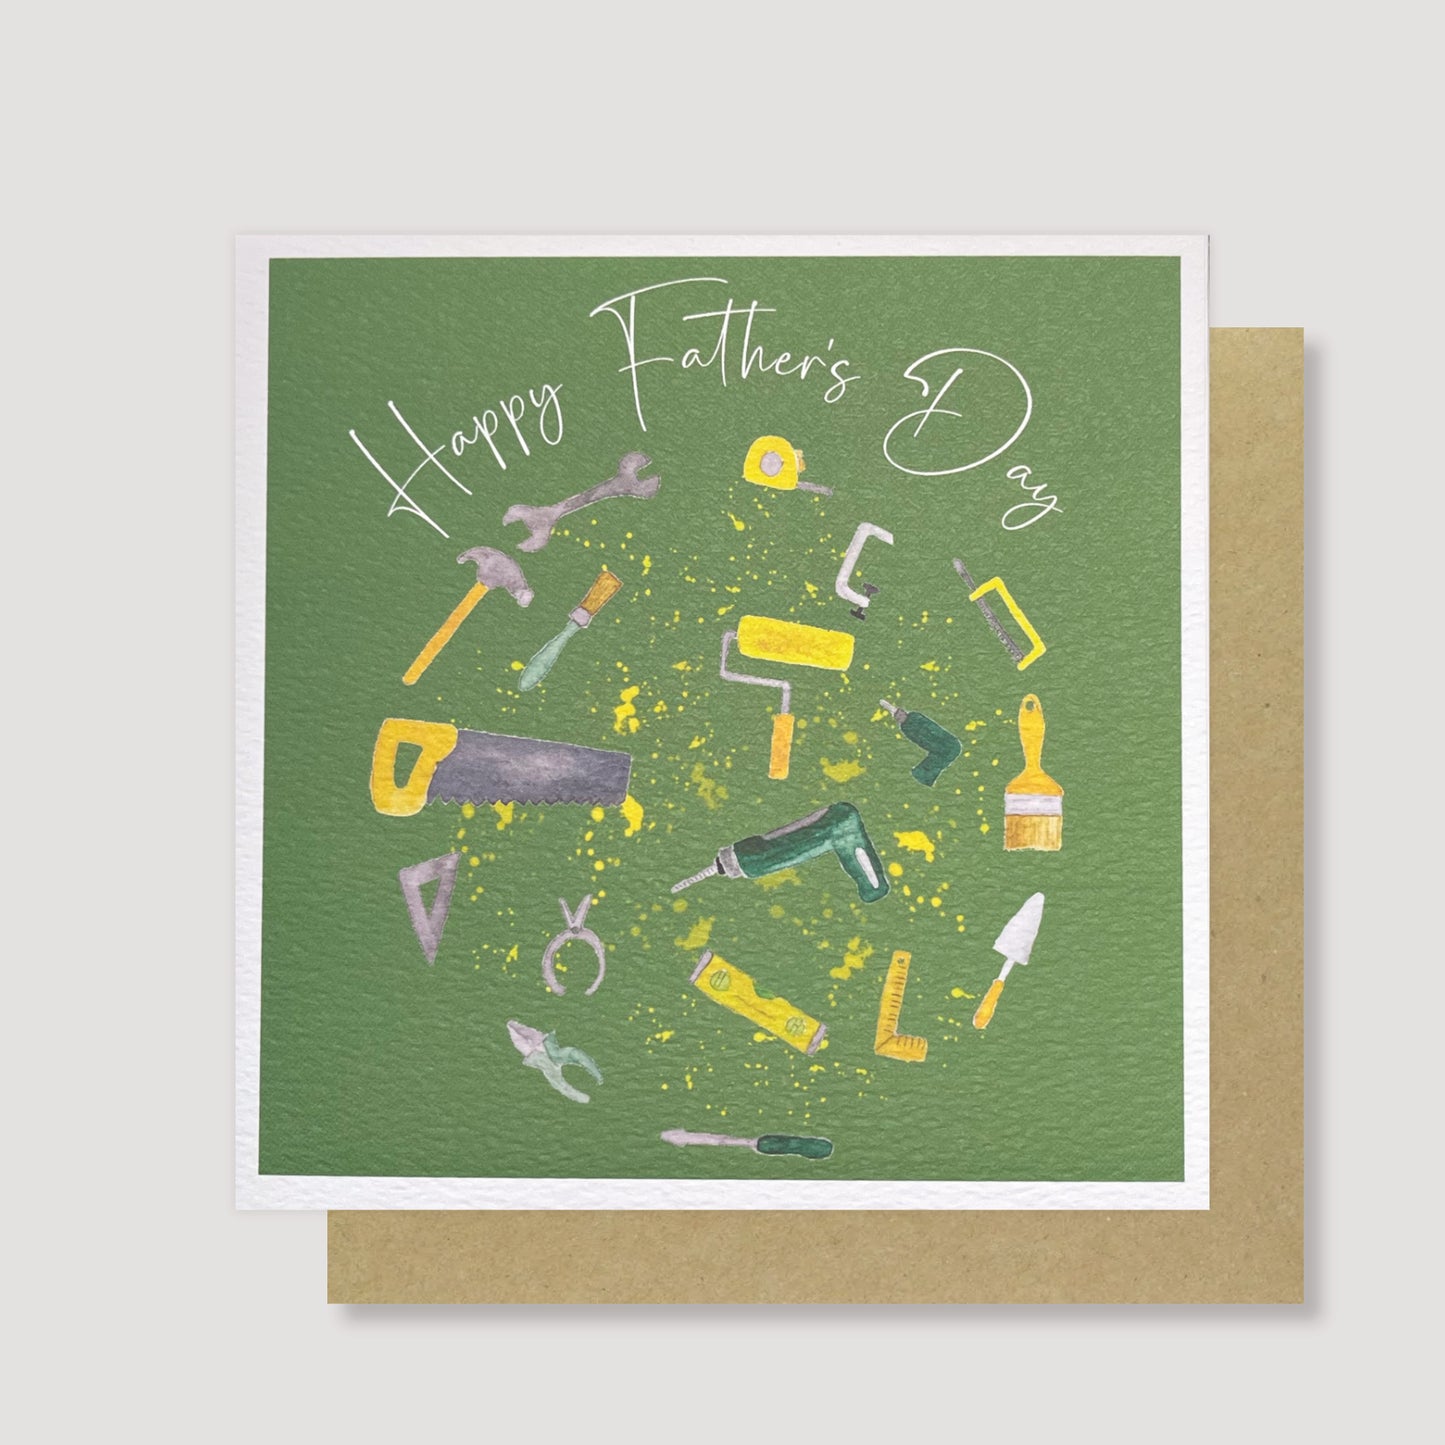 Happy Father's Day tools card